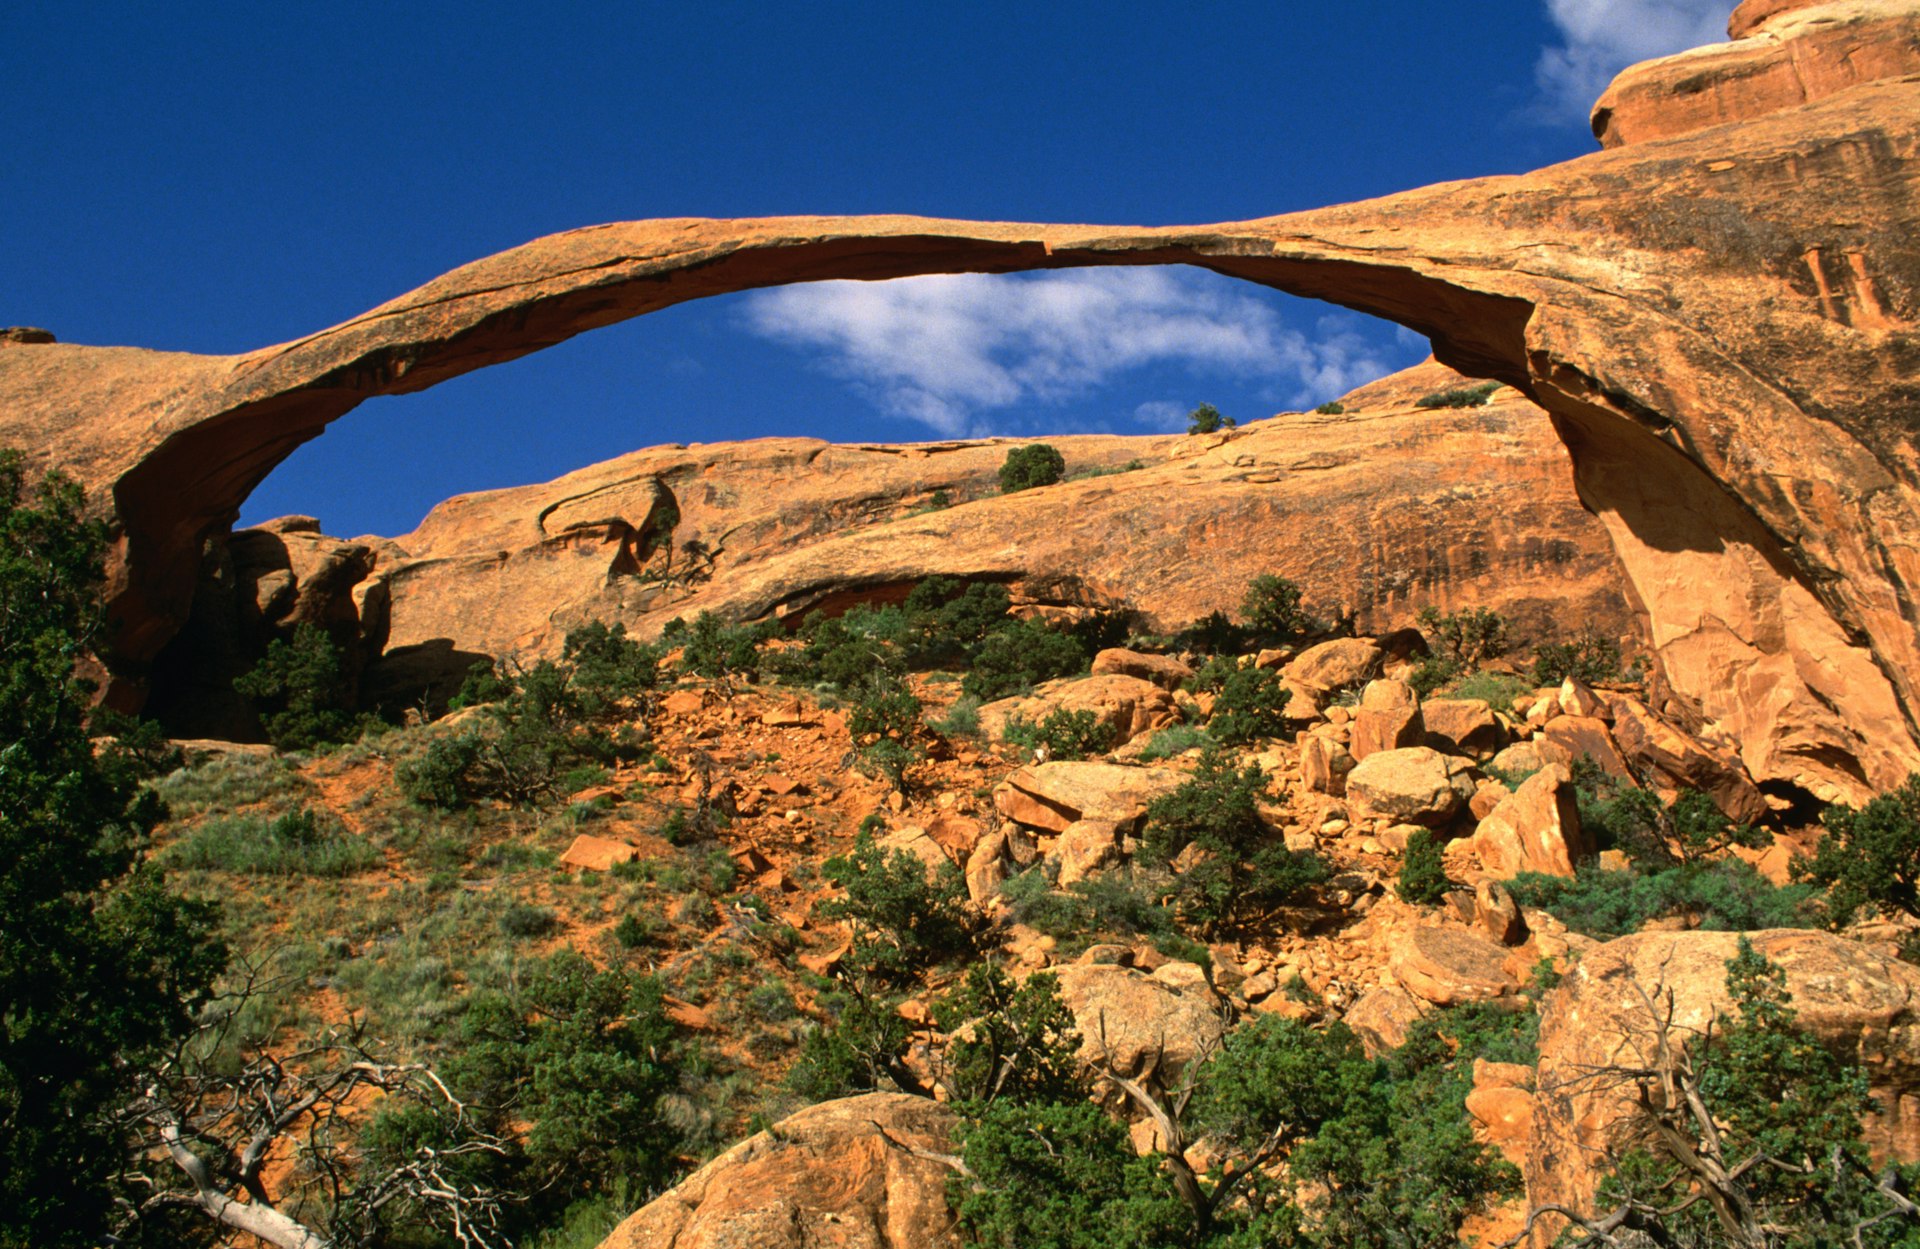 A view of Landscape Arch in Arches National Park